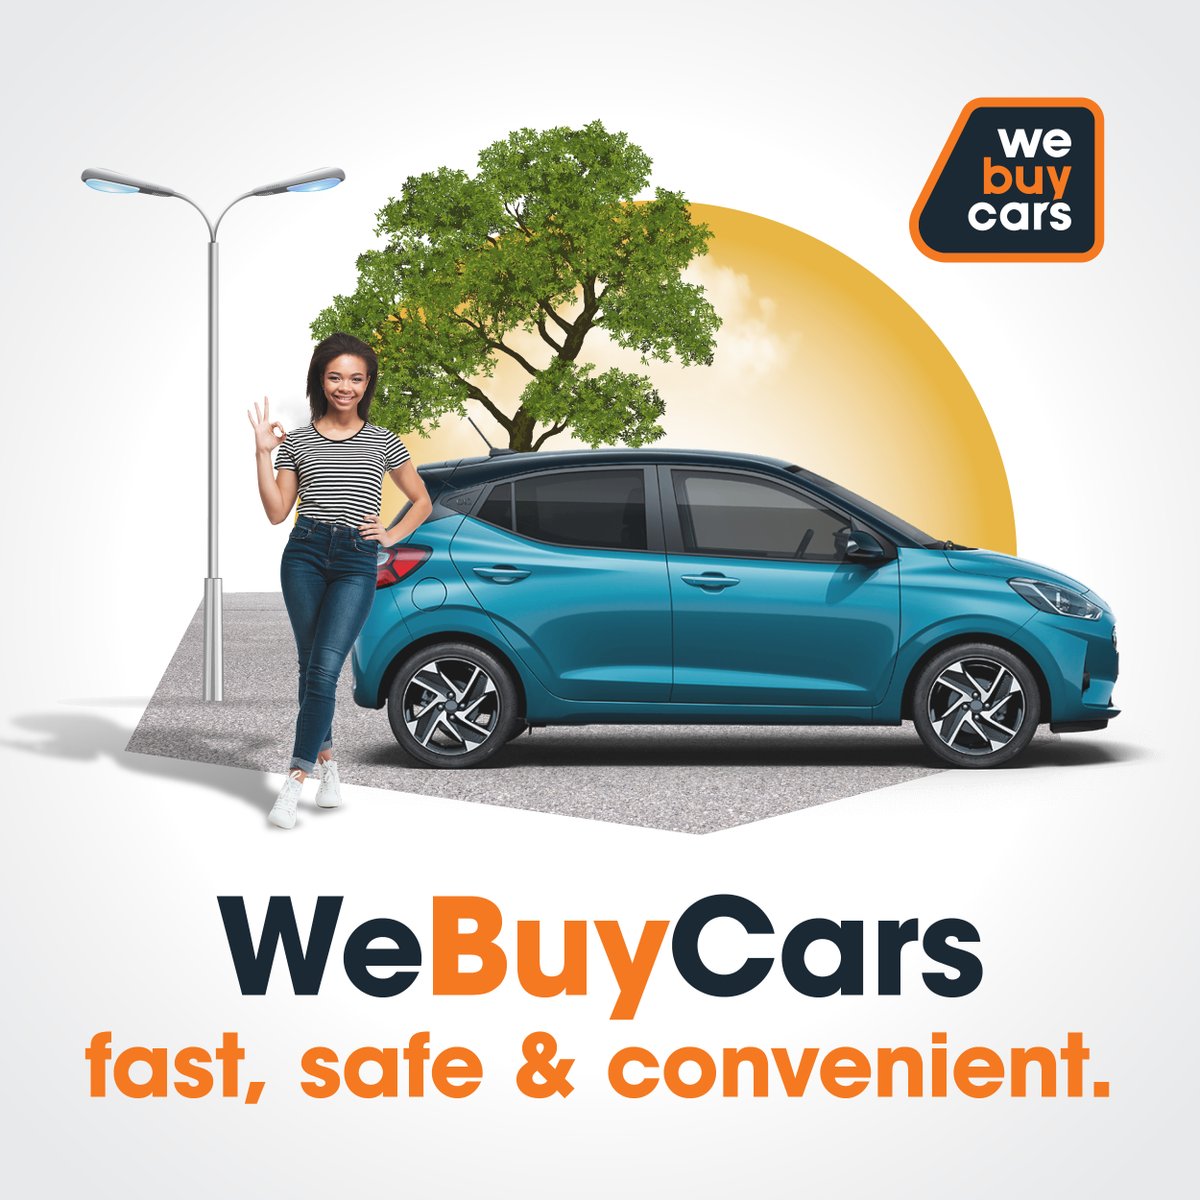 Selling your car doesn't have to be a hassle! 🤩 #WeBuyCars makes it fast, safe, and convenient for you. 🚗 #carsforsale #autosales #carshopping #carsales #usedcars #sellyourcar #cardealer #carlifestyle #carlovers #carsofinstagram